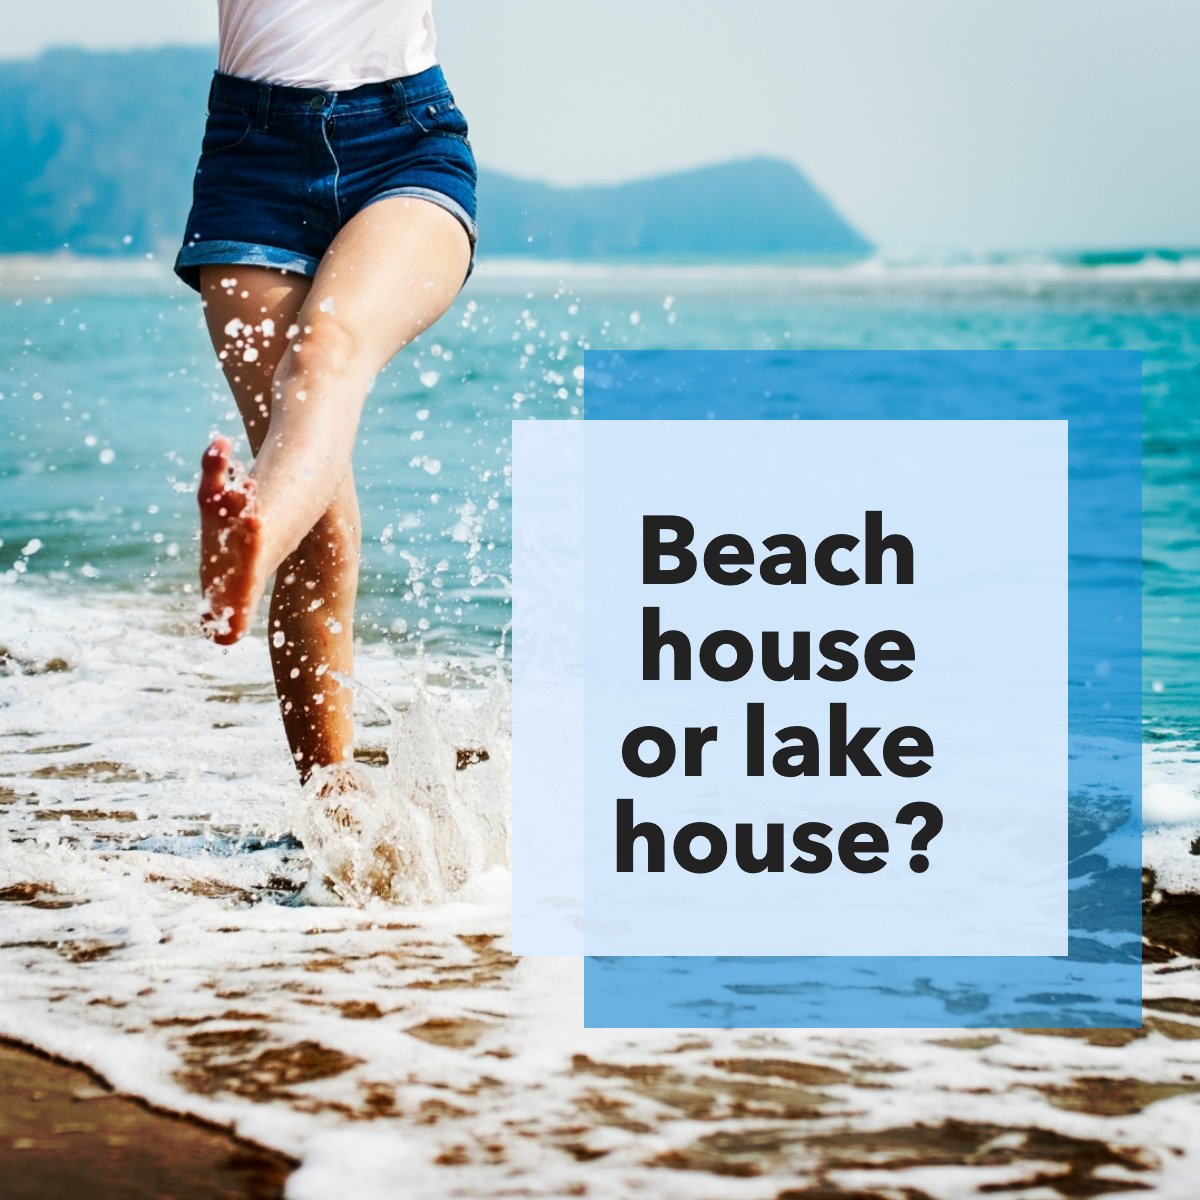 Which would you choose? 🏖🏞 

Tell us your first choice in the comments!

#beach #water #lake #vacation #summer #beachday #beachhouse #lakehouse
 #BorahRealtySource #Borahsdiditagain #Borahsoldit #bestteamintown #6788737018 #HouseHunting #Newhome #Broker